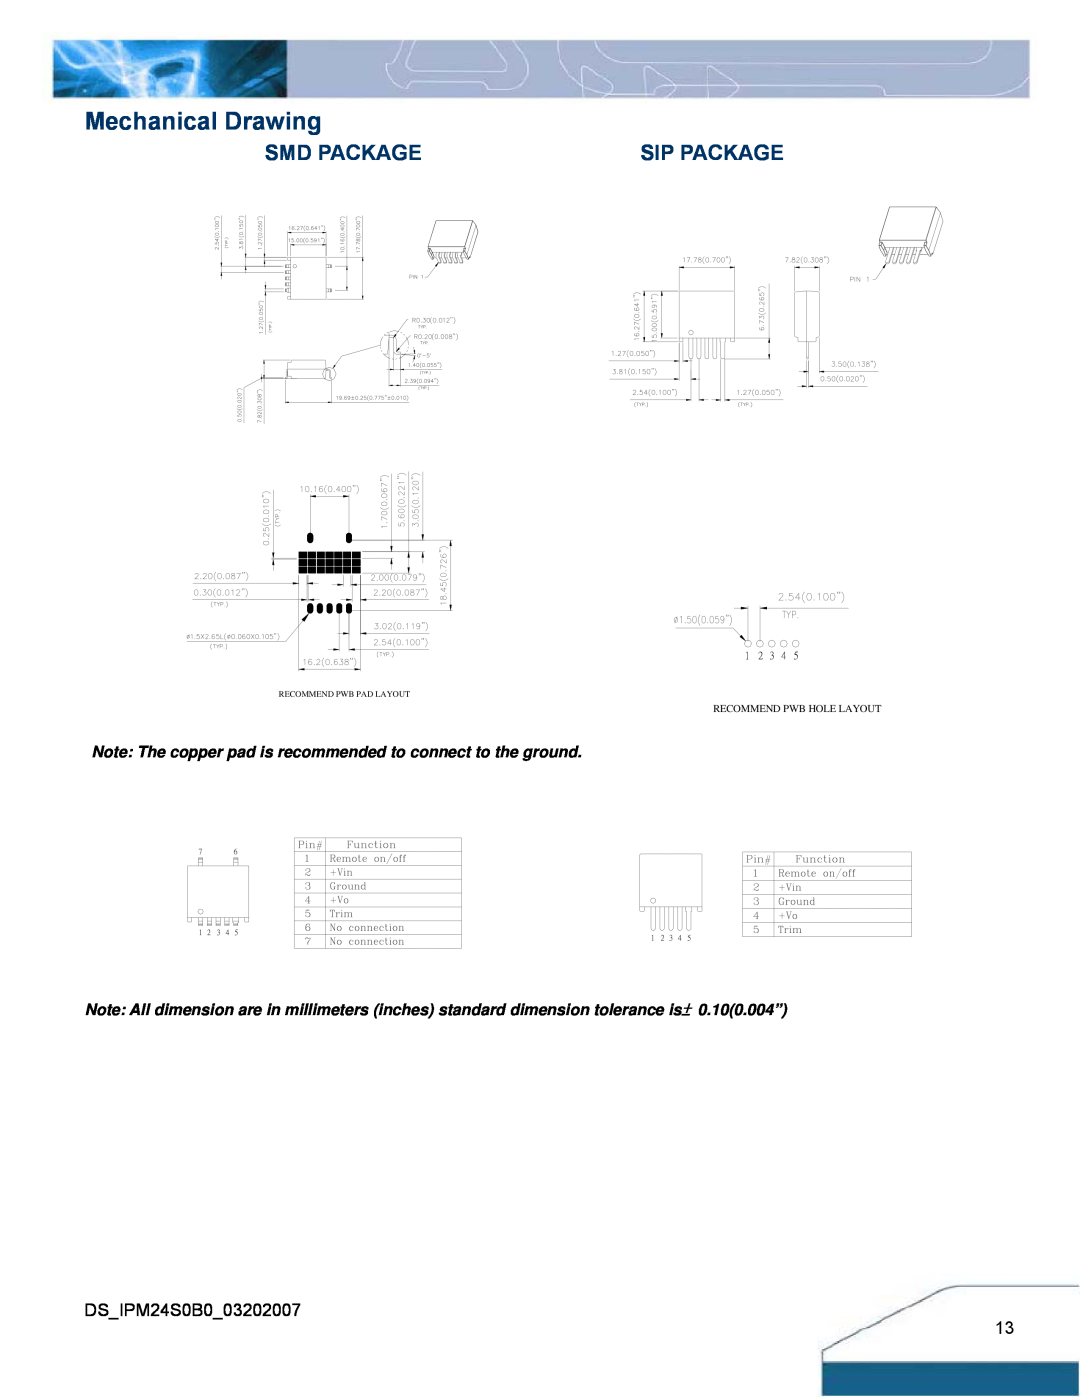 Delta Electronics IPM24S0B0 manual Mechanical Drawing, Smd Package, Sip Package, 1 2 3 4, Recommend Pwb Hole Layout 